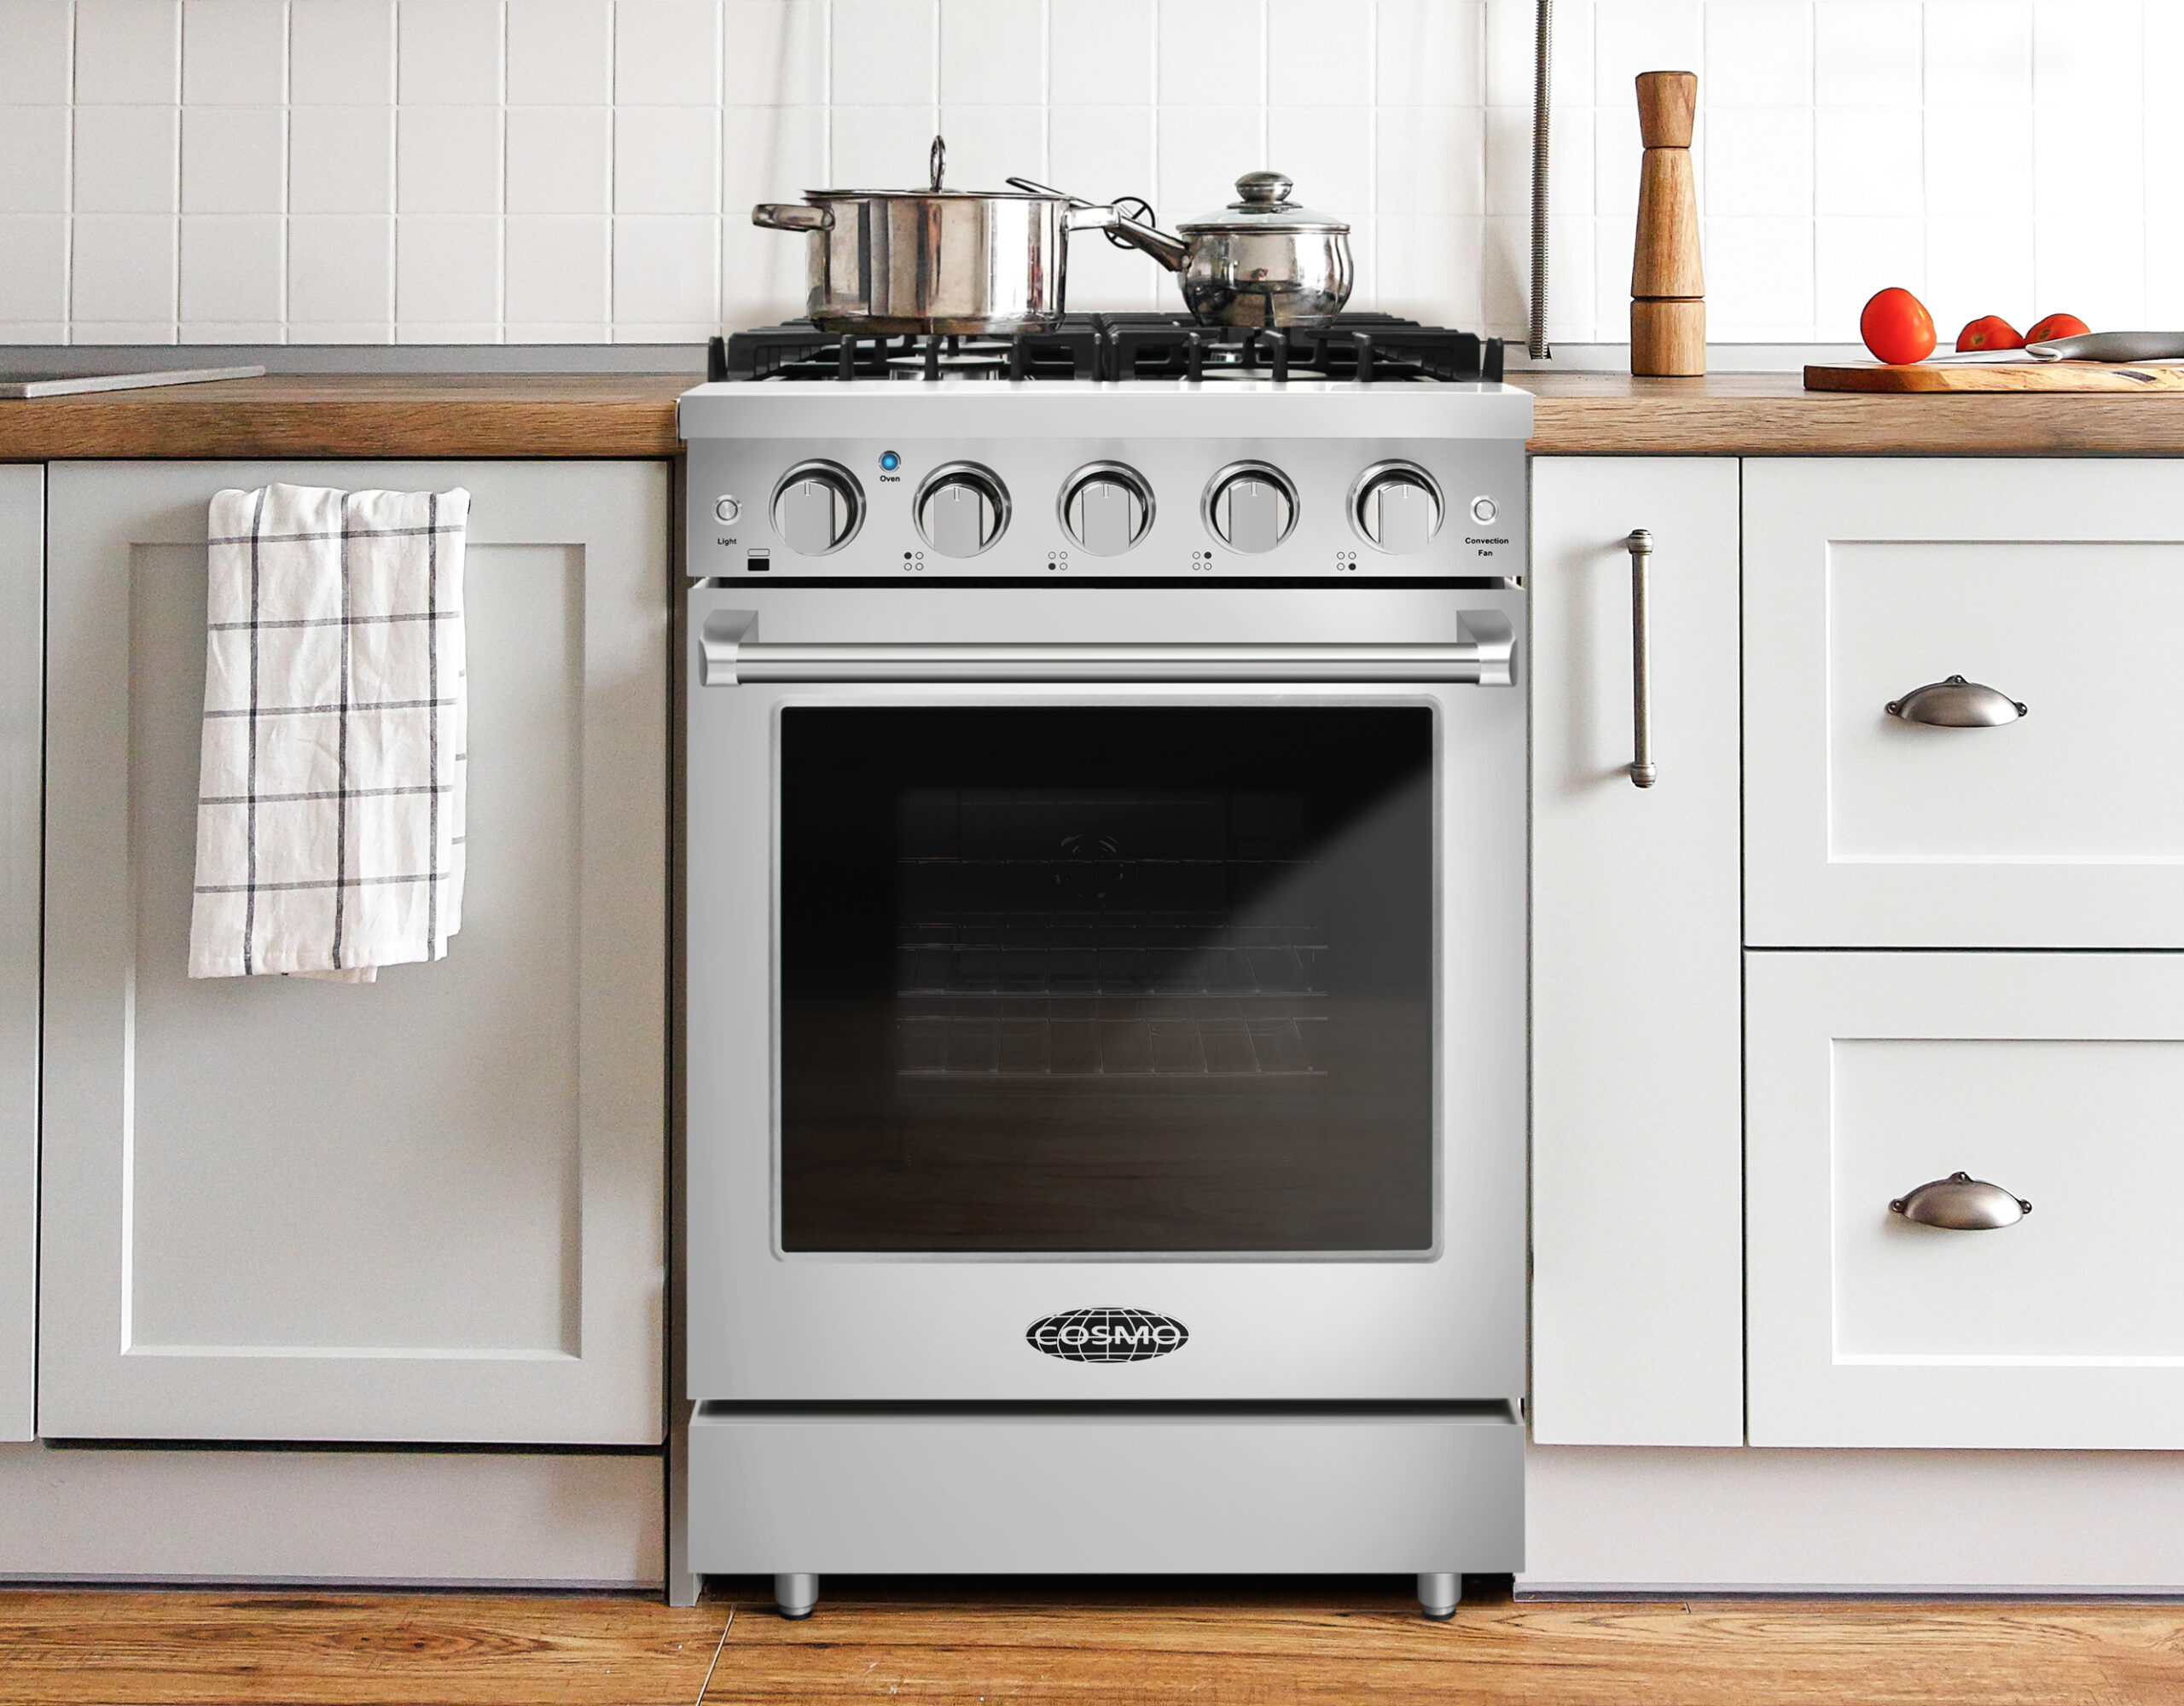 COS-EPGR244, The Ultimate Compact Gas Range